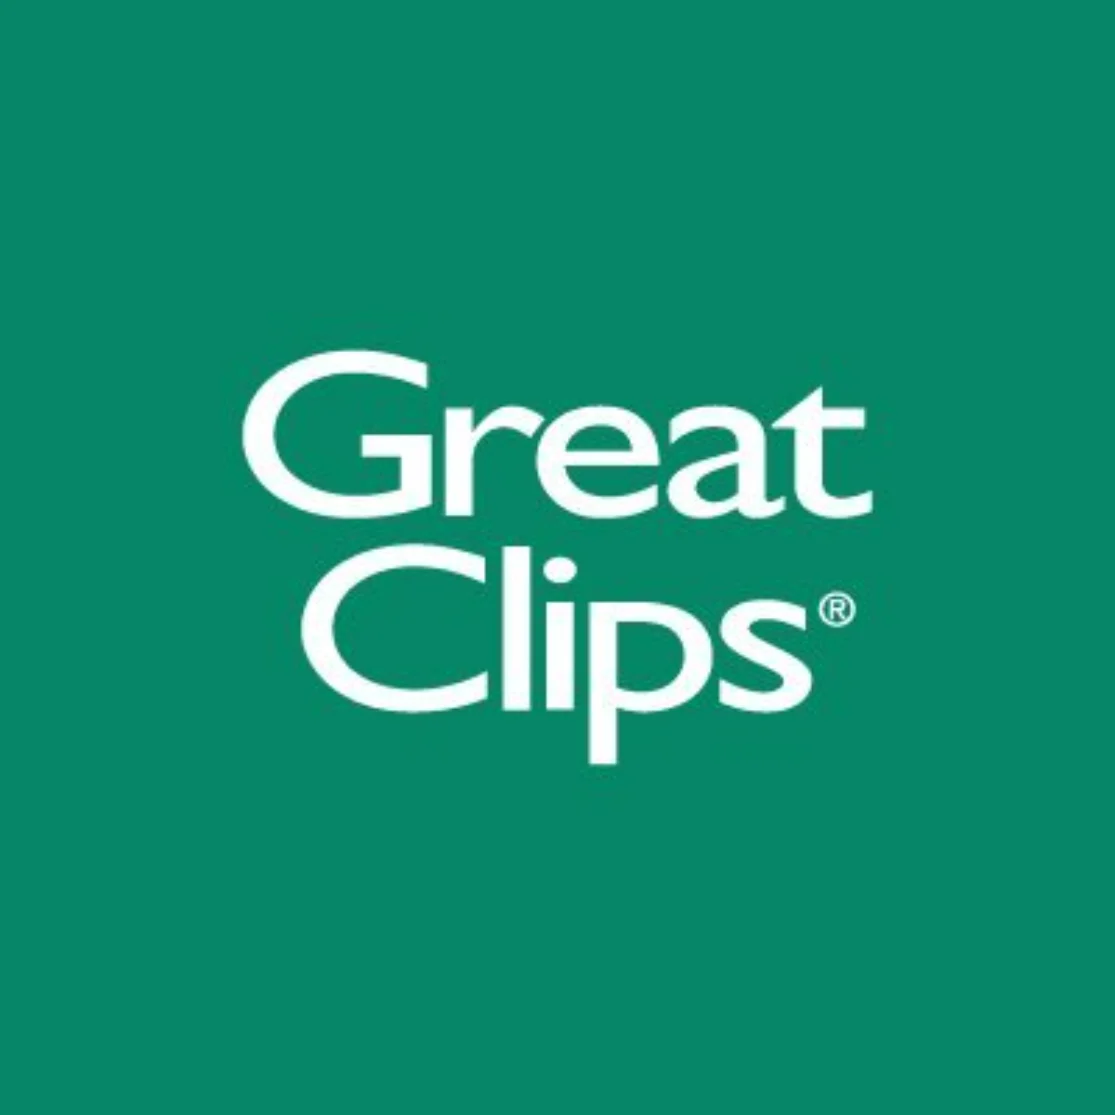 Great Clips Senior Discount: $2 Off Haircuts